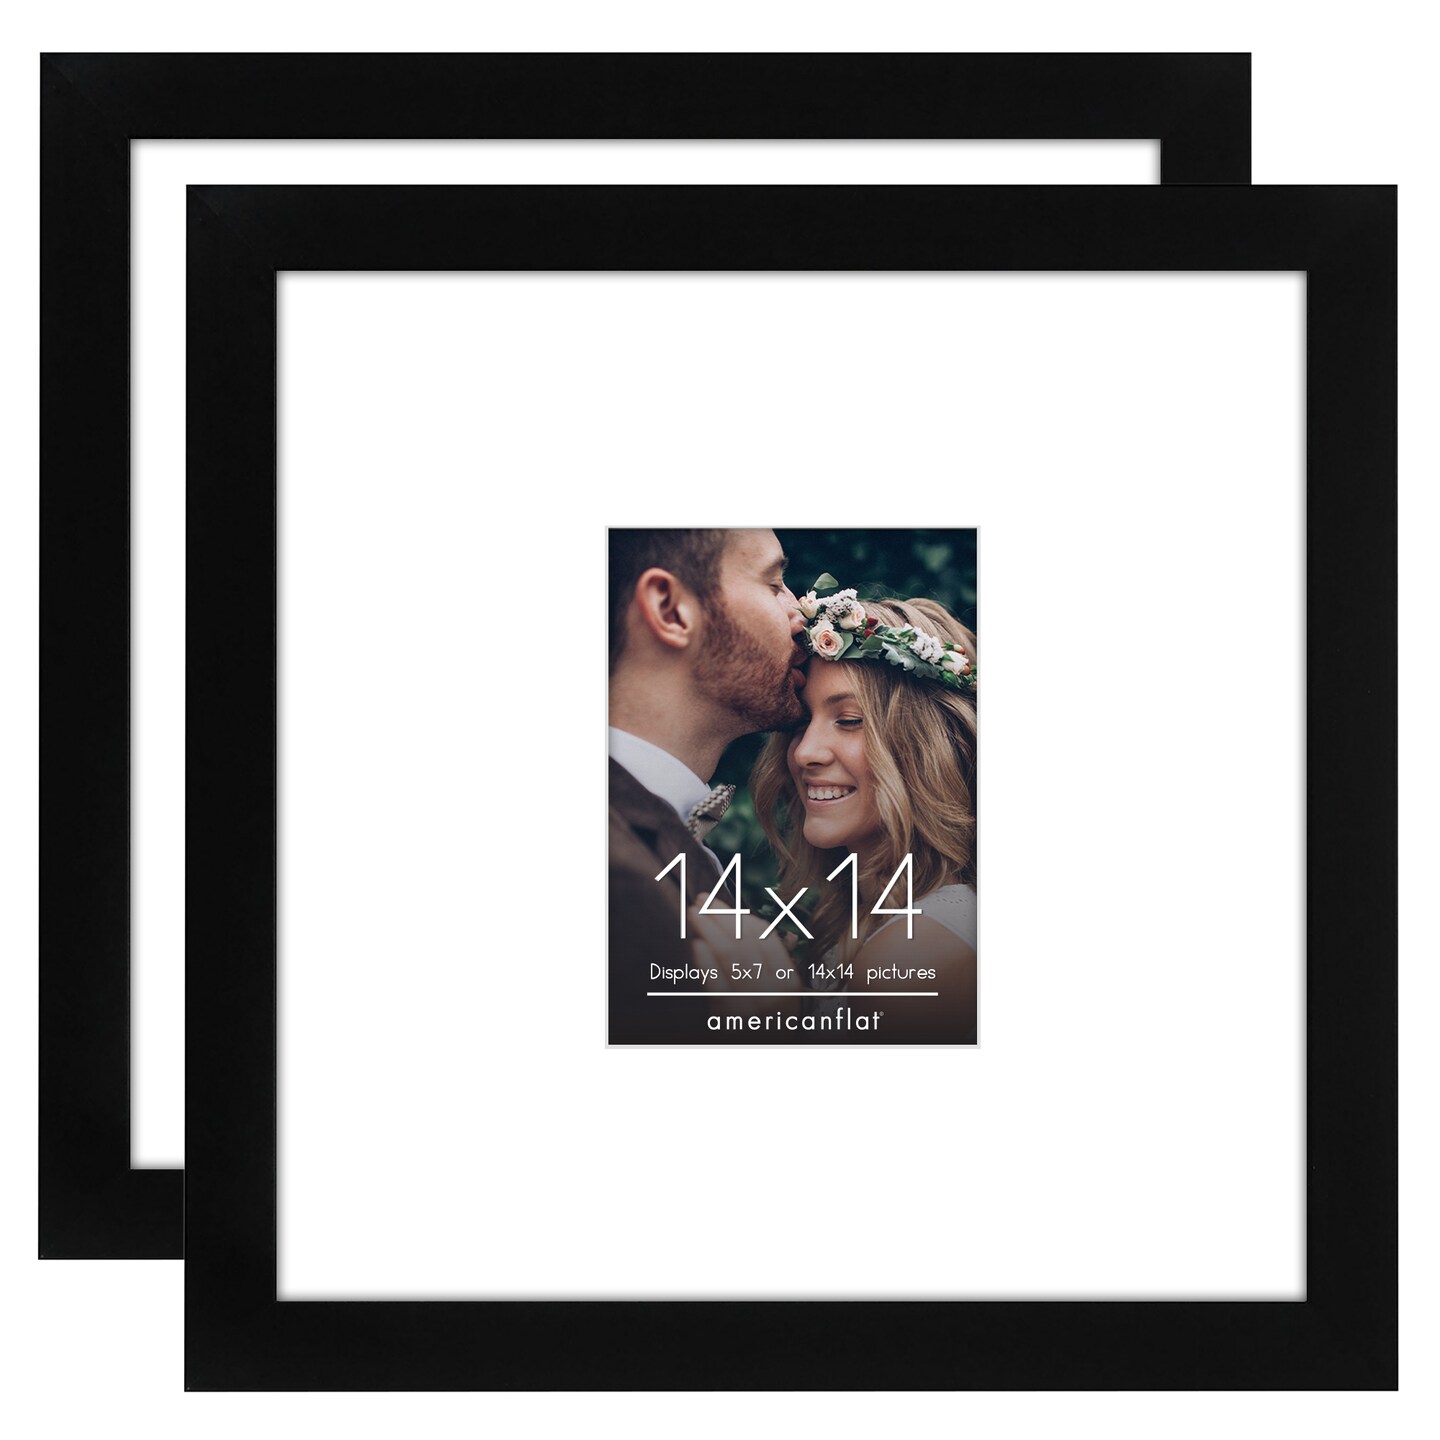 Americanflat 14x14 Wedding Signature Picture Frame - Set of 2 - 5x7 with Mat or 14x14 without Mat - Signature Frame for Celebrations - Shatter Resistant Glass - Hanging Hardware - Black